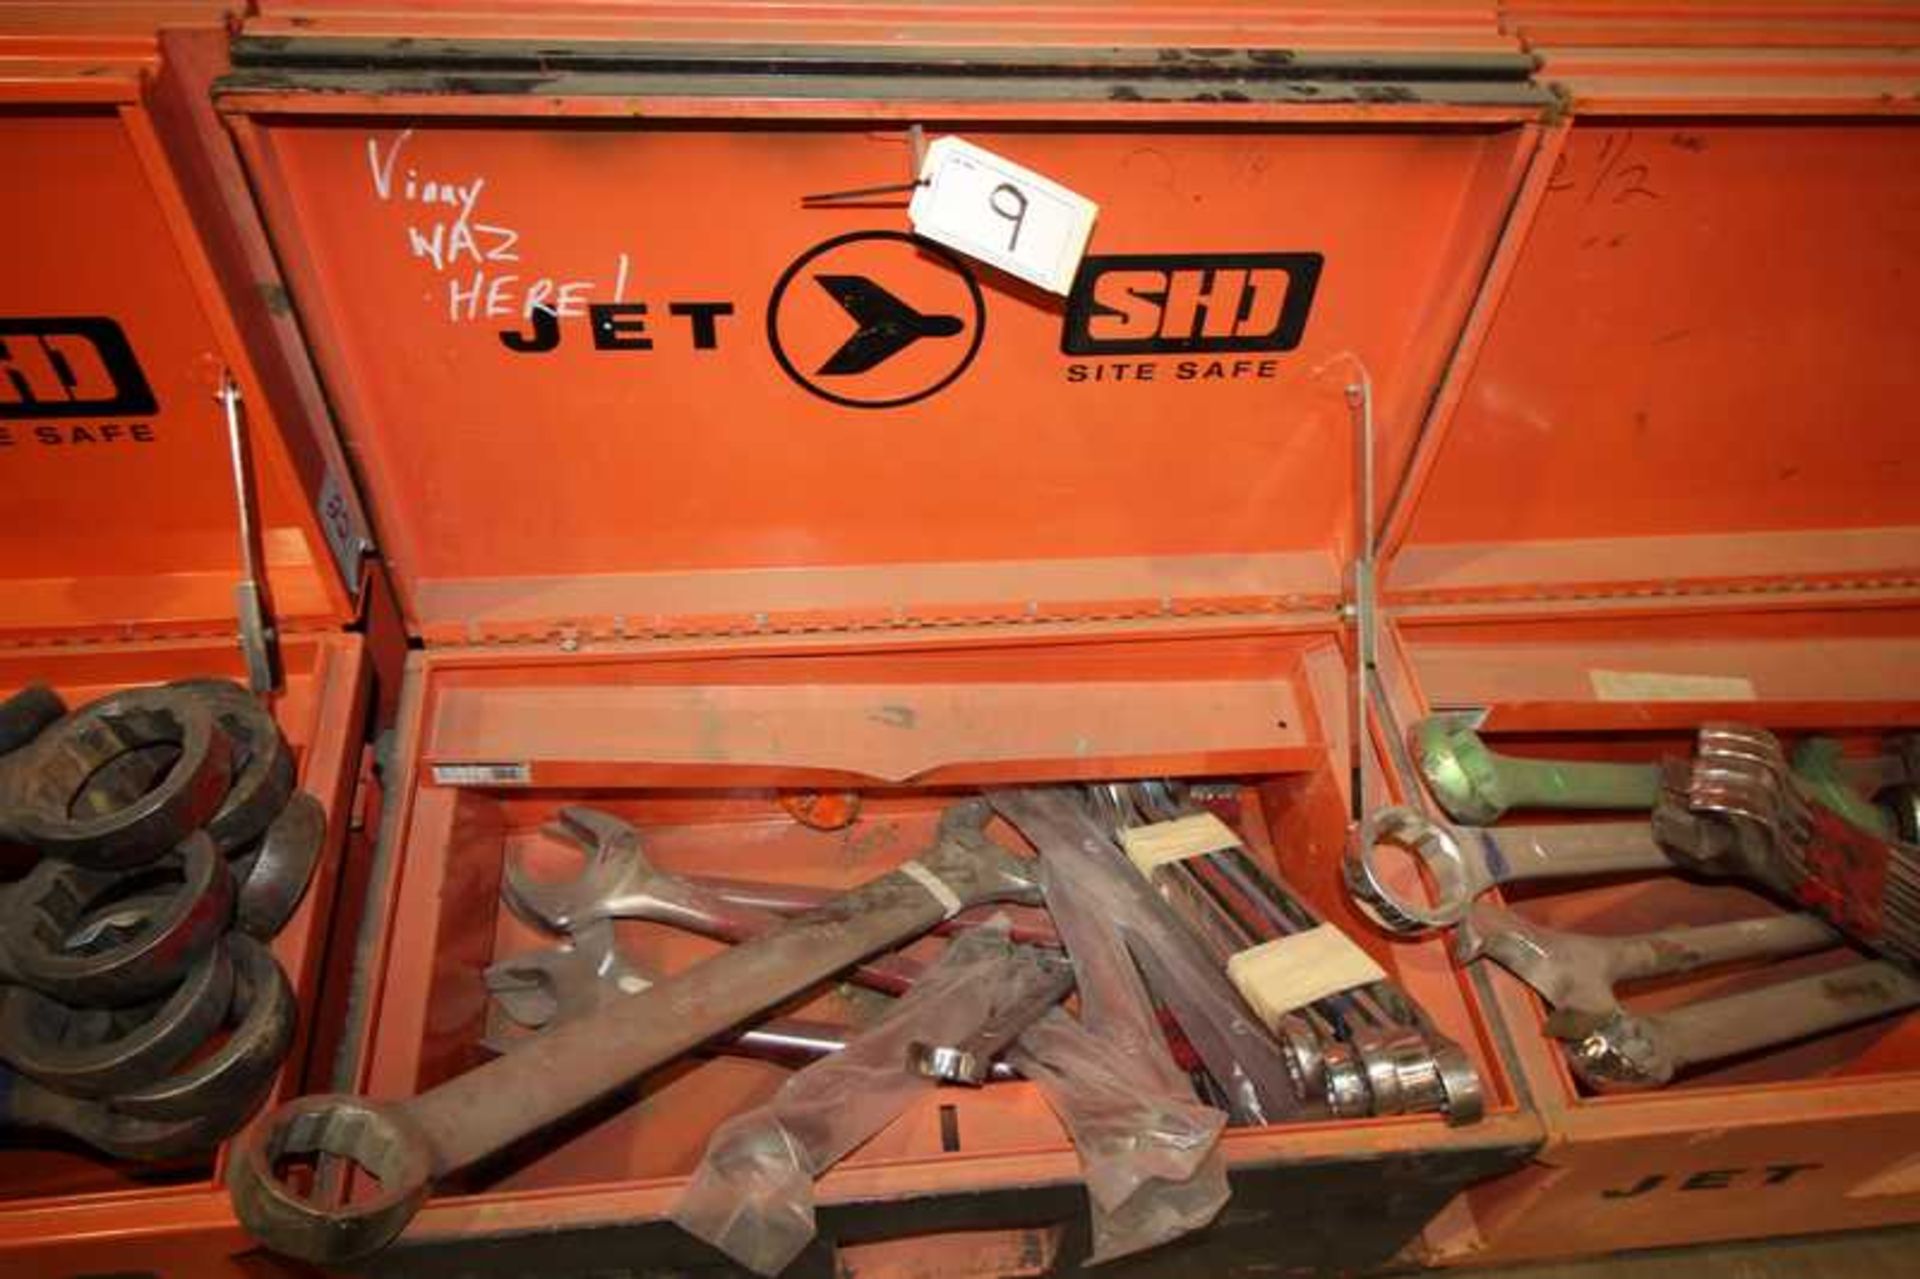 JOB BOX W/LOT OF LGE WRENCHES